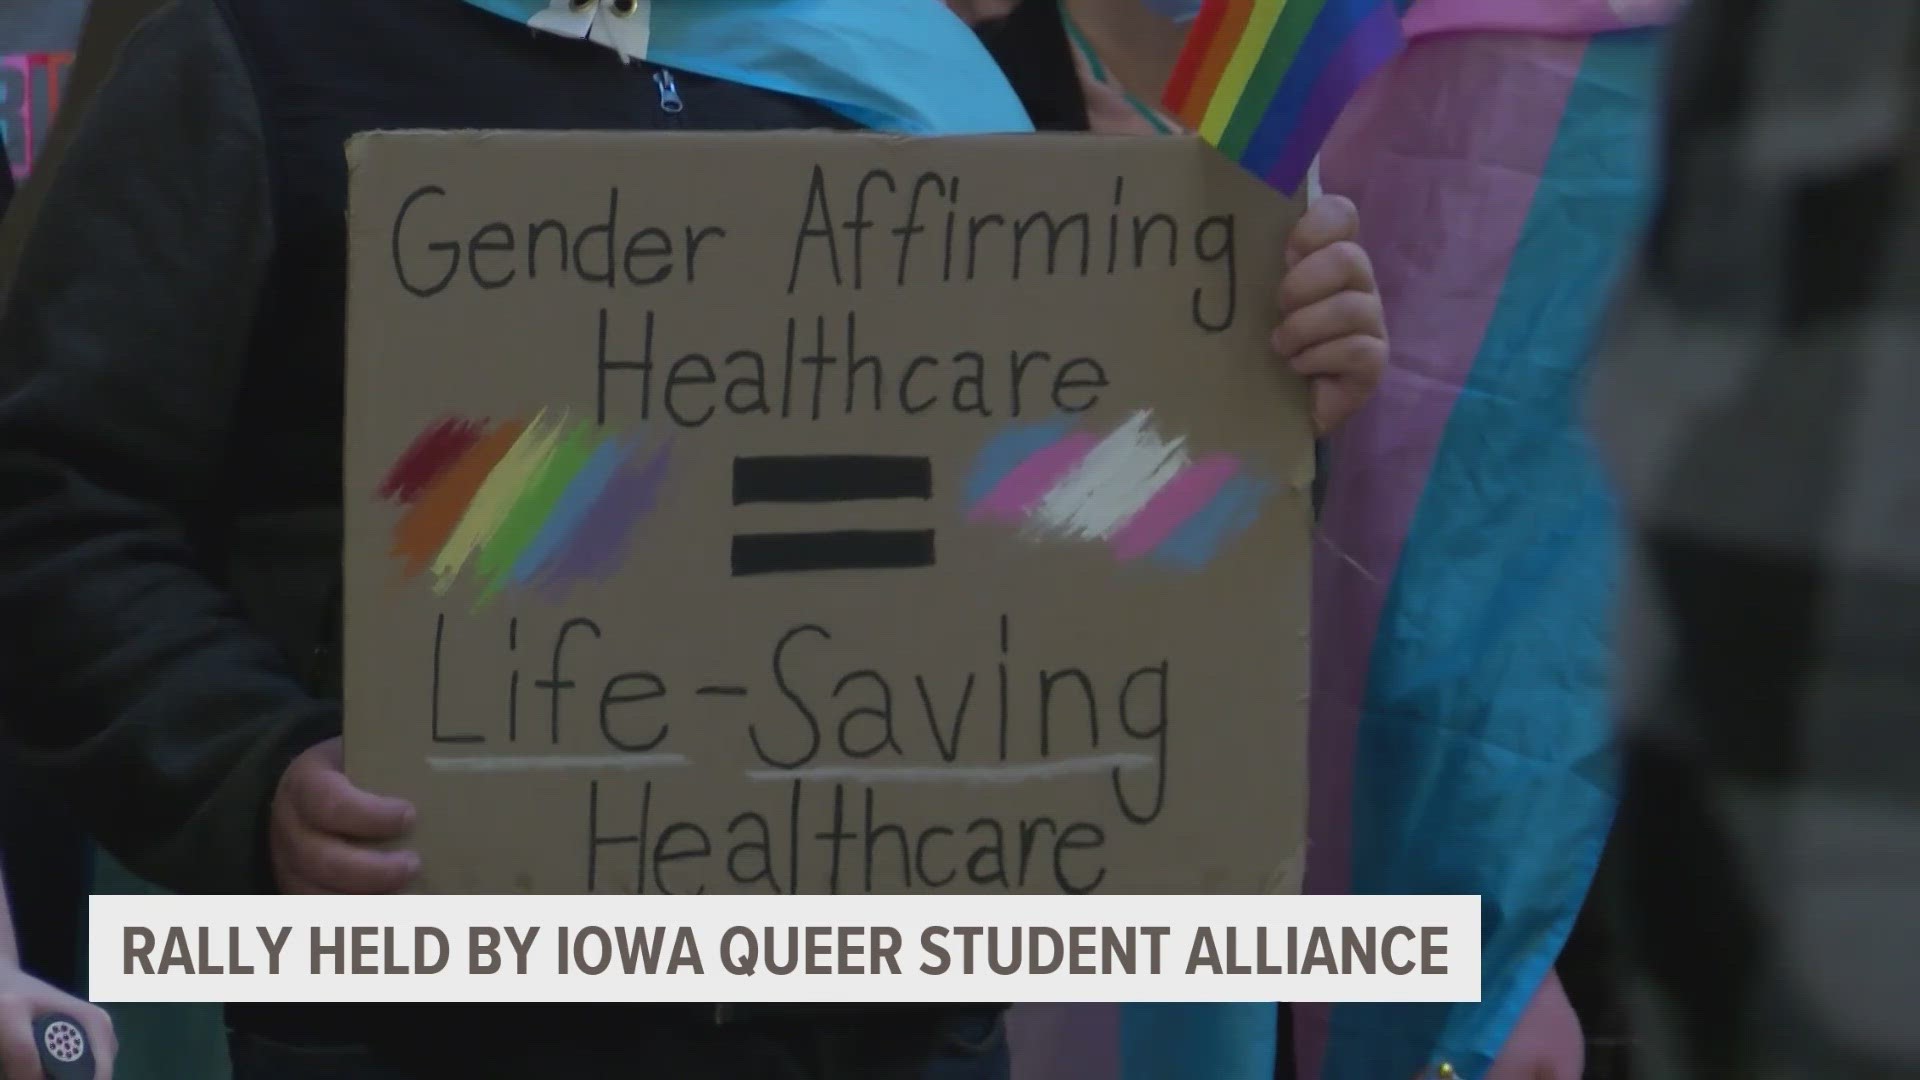 The rally was organized by the Iowa Queer Student Alliance, who also helped put together student walkouts over the same bills.